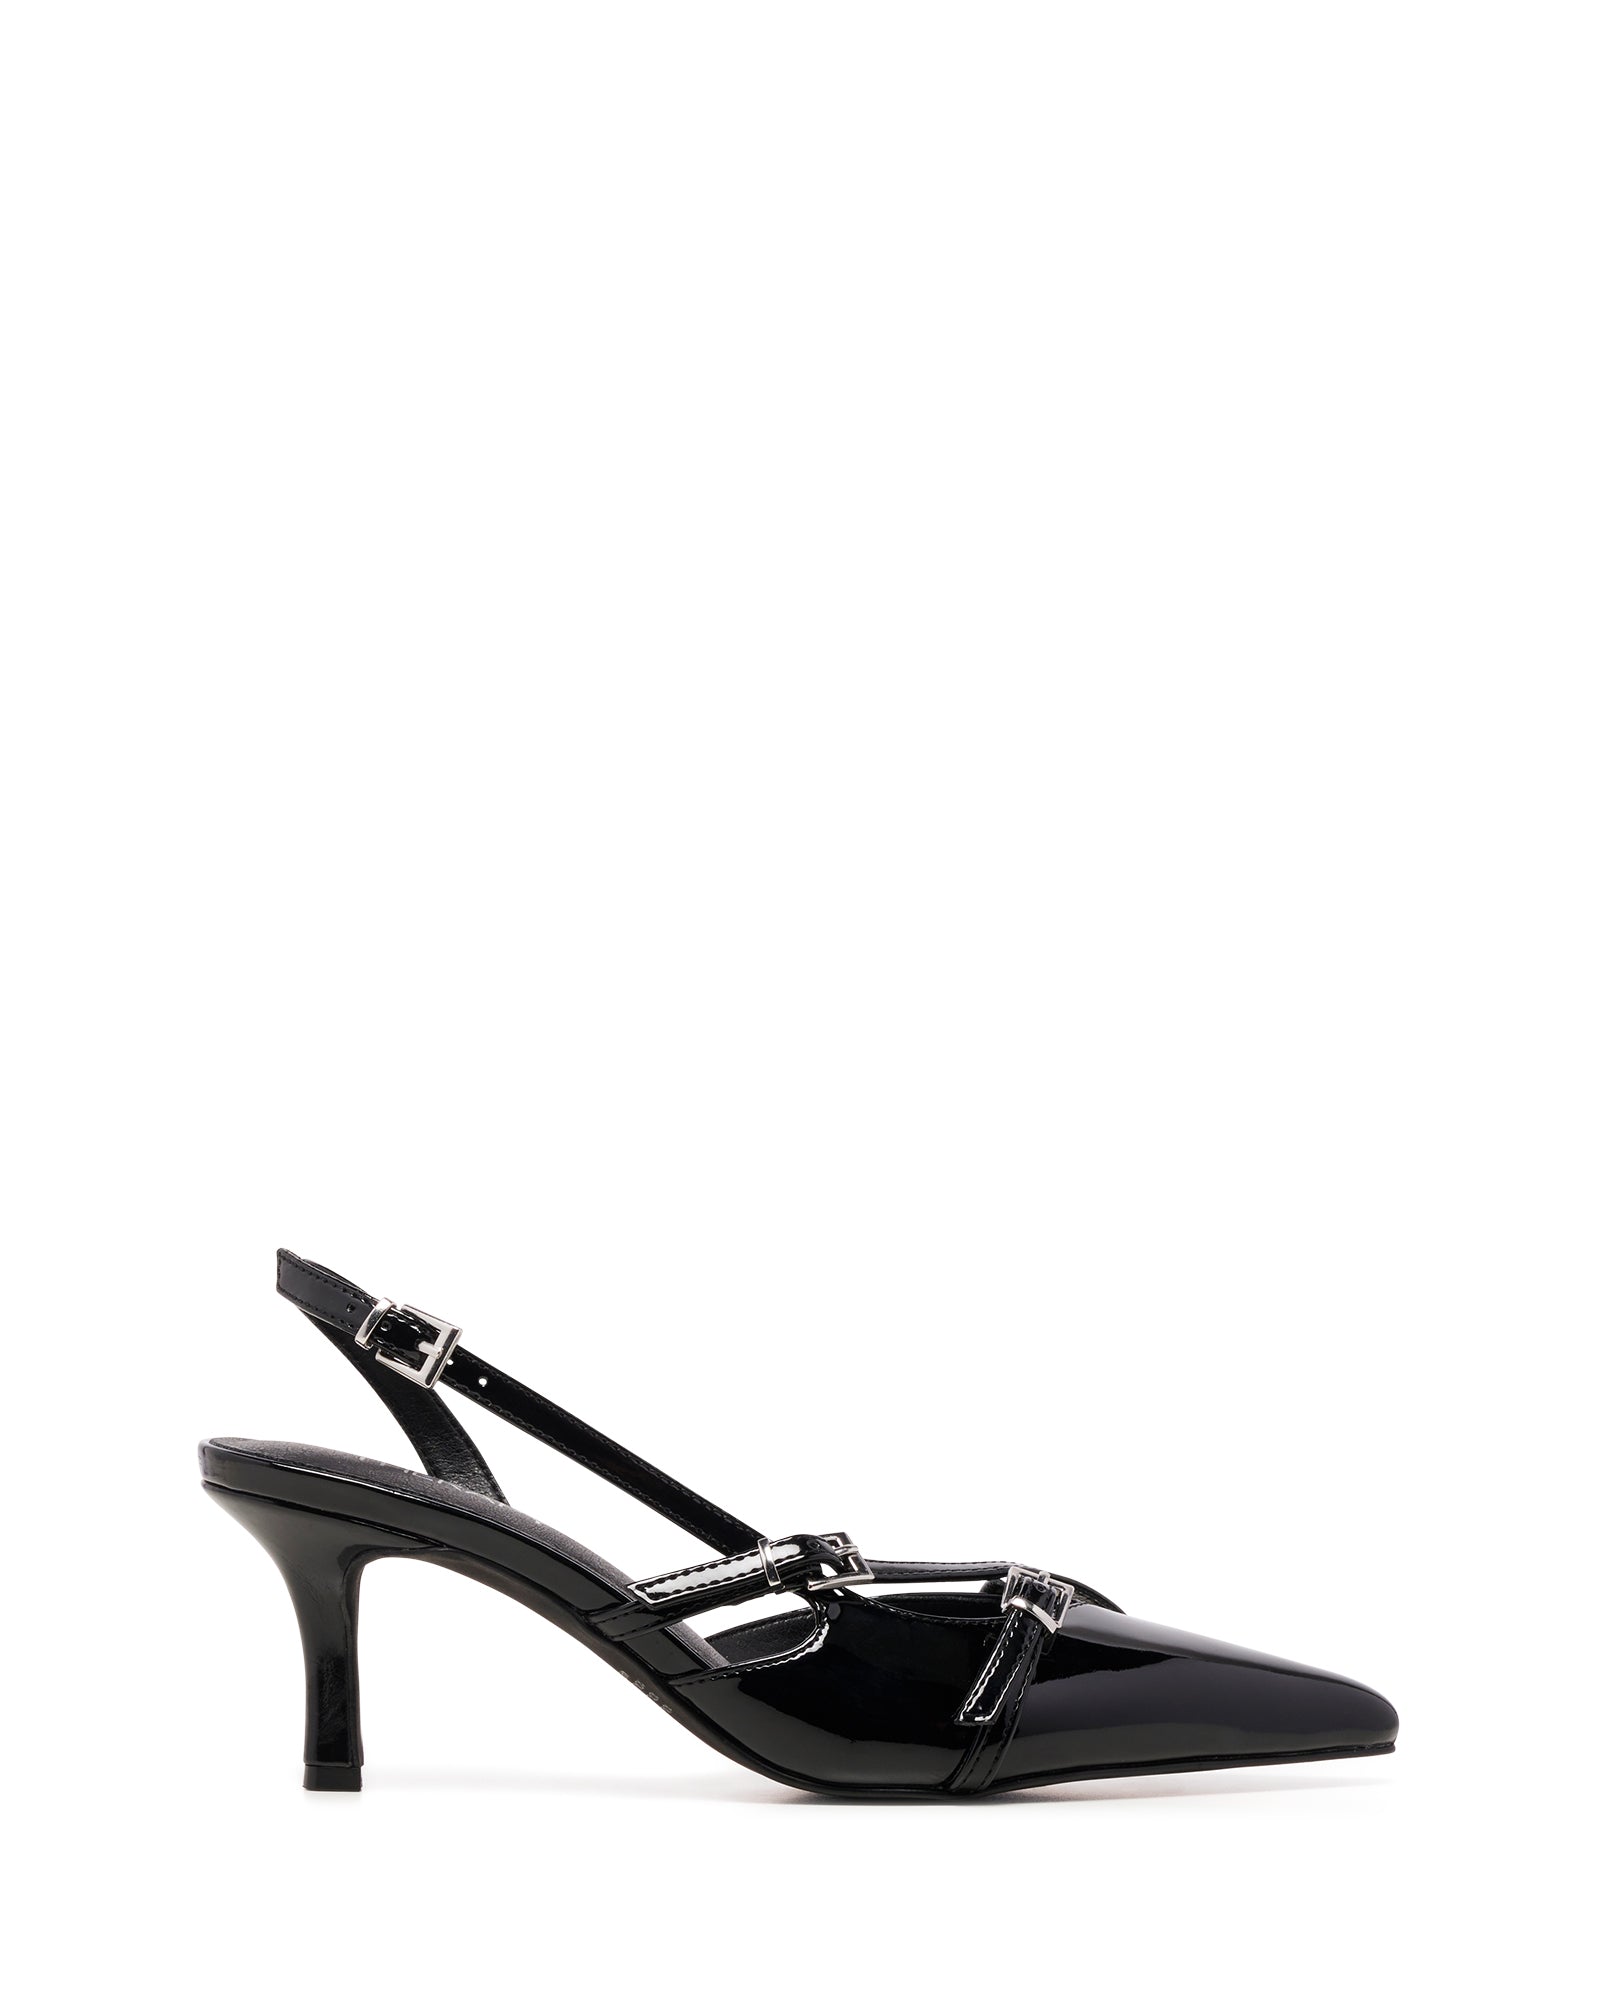 Therapy Shoes Juicy Black Patent | Women's Heels | Slingback | Pump | Stiletto